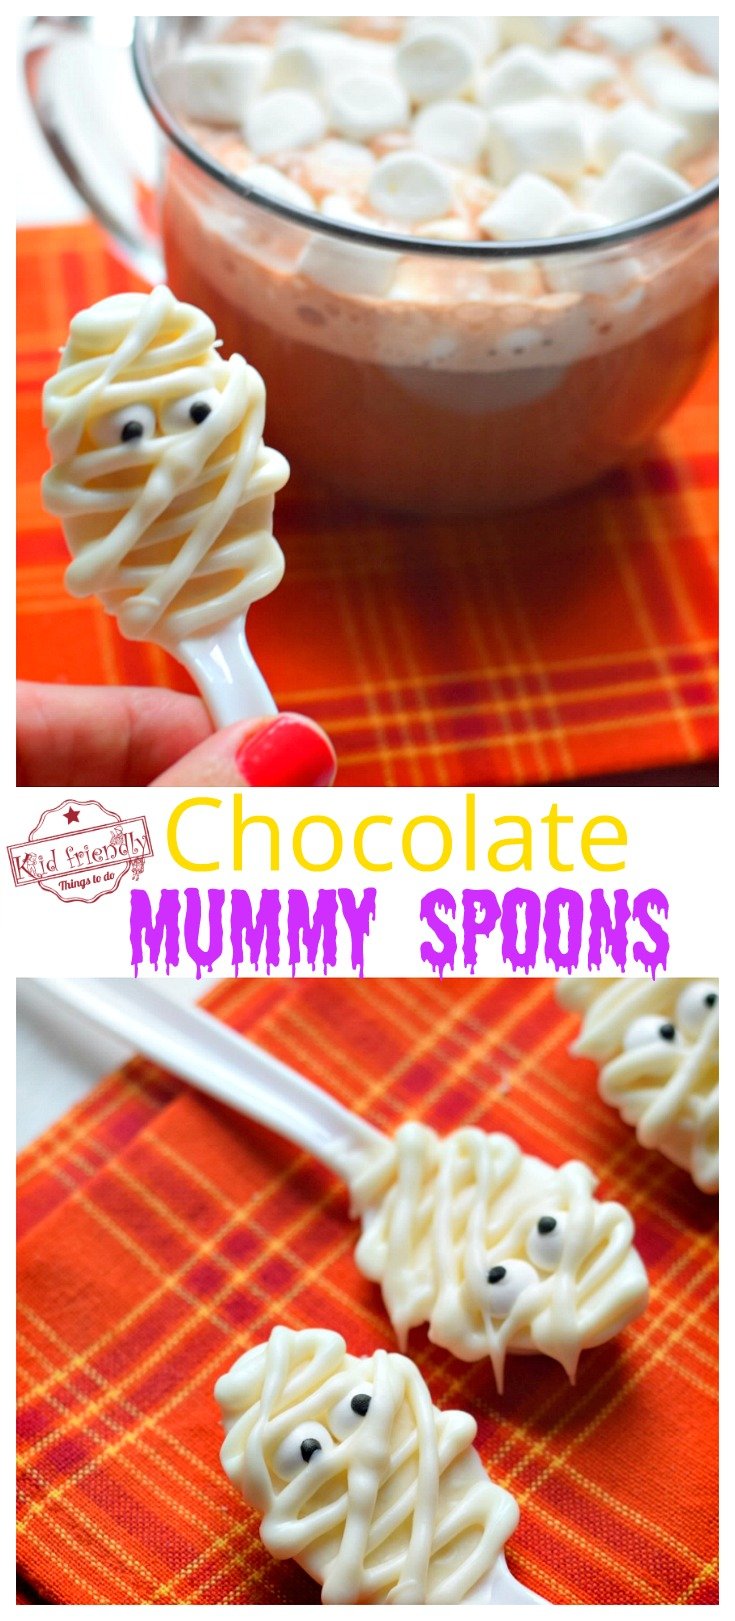 Chocolate Mummy Spoons Halloween treats for a party